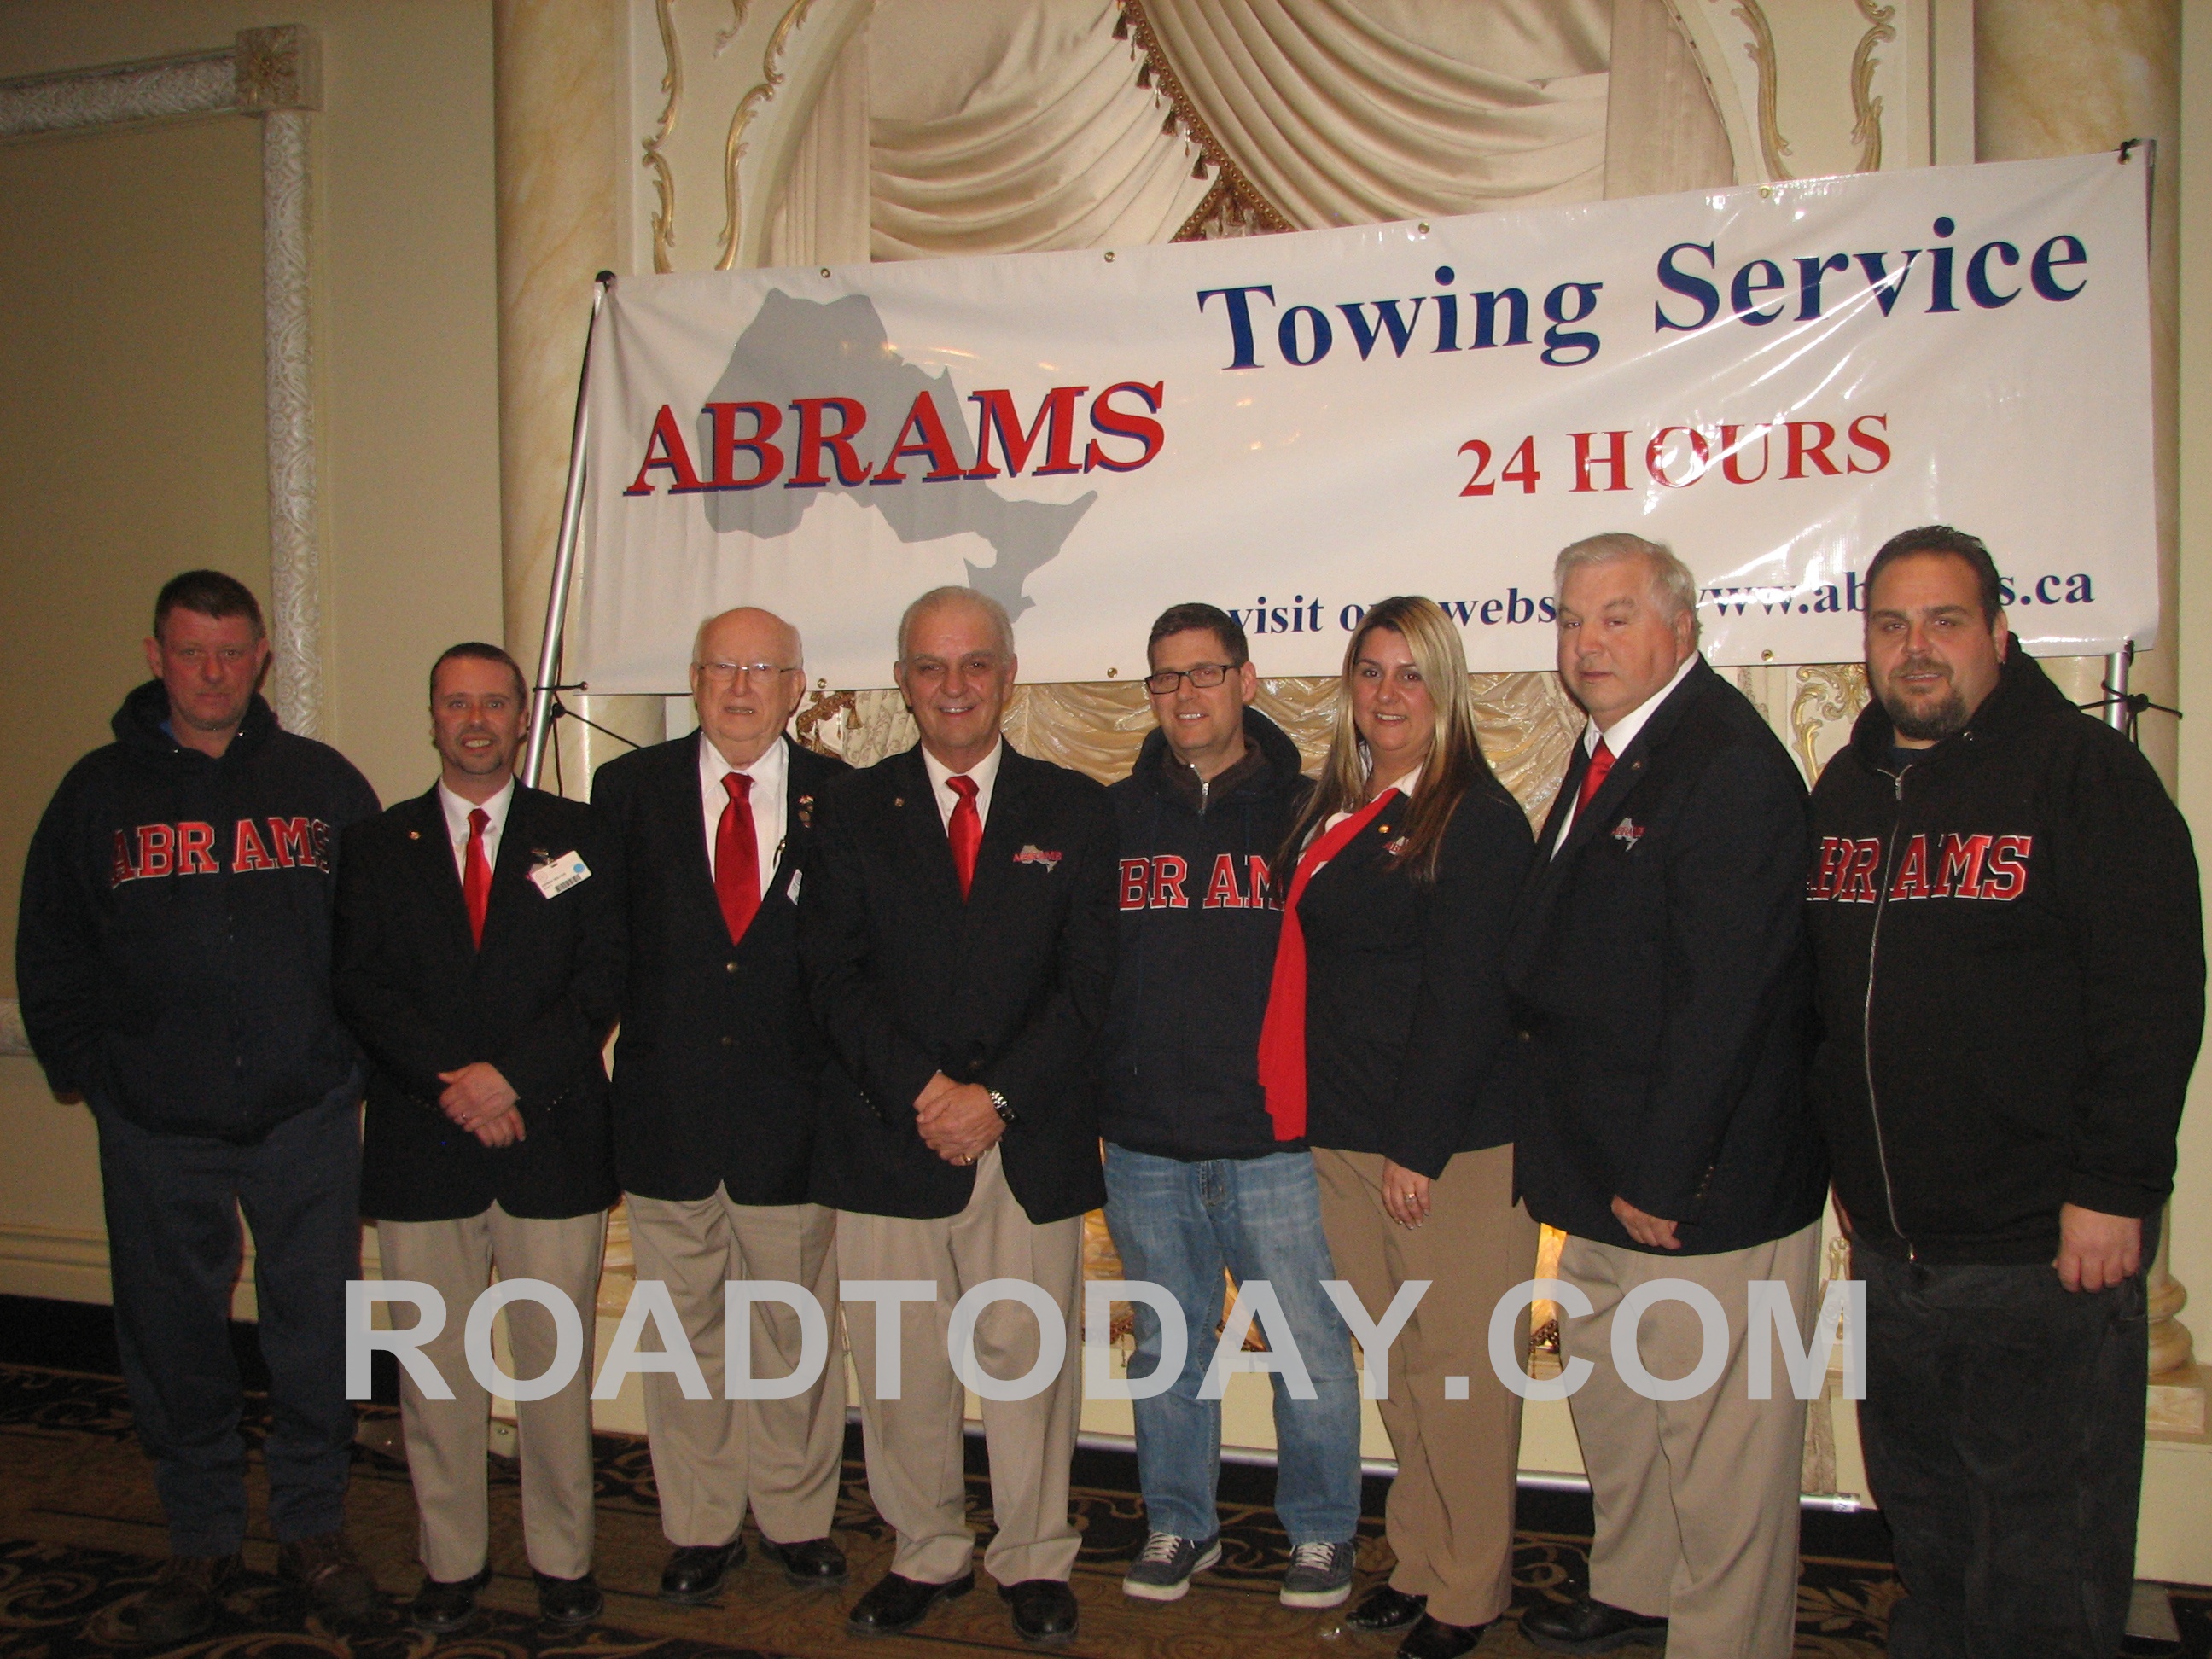 ABRAMS TOWING continues to support ATSSA